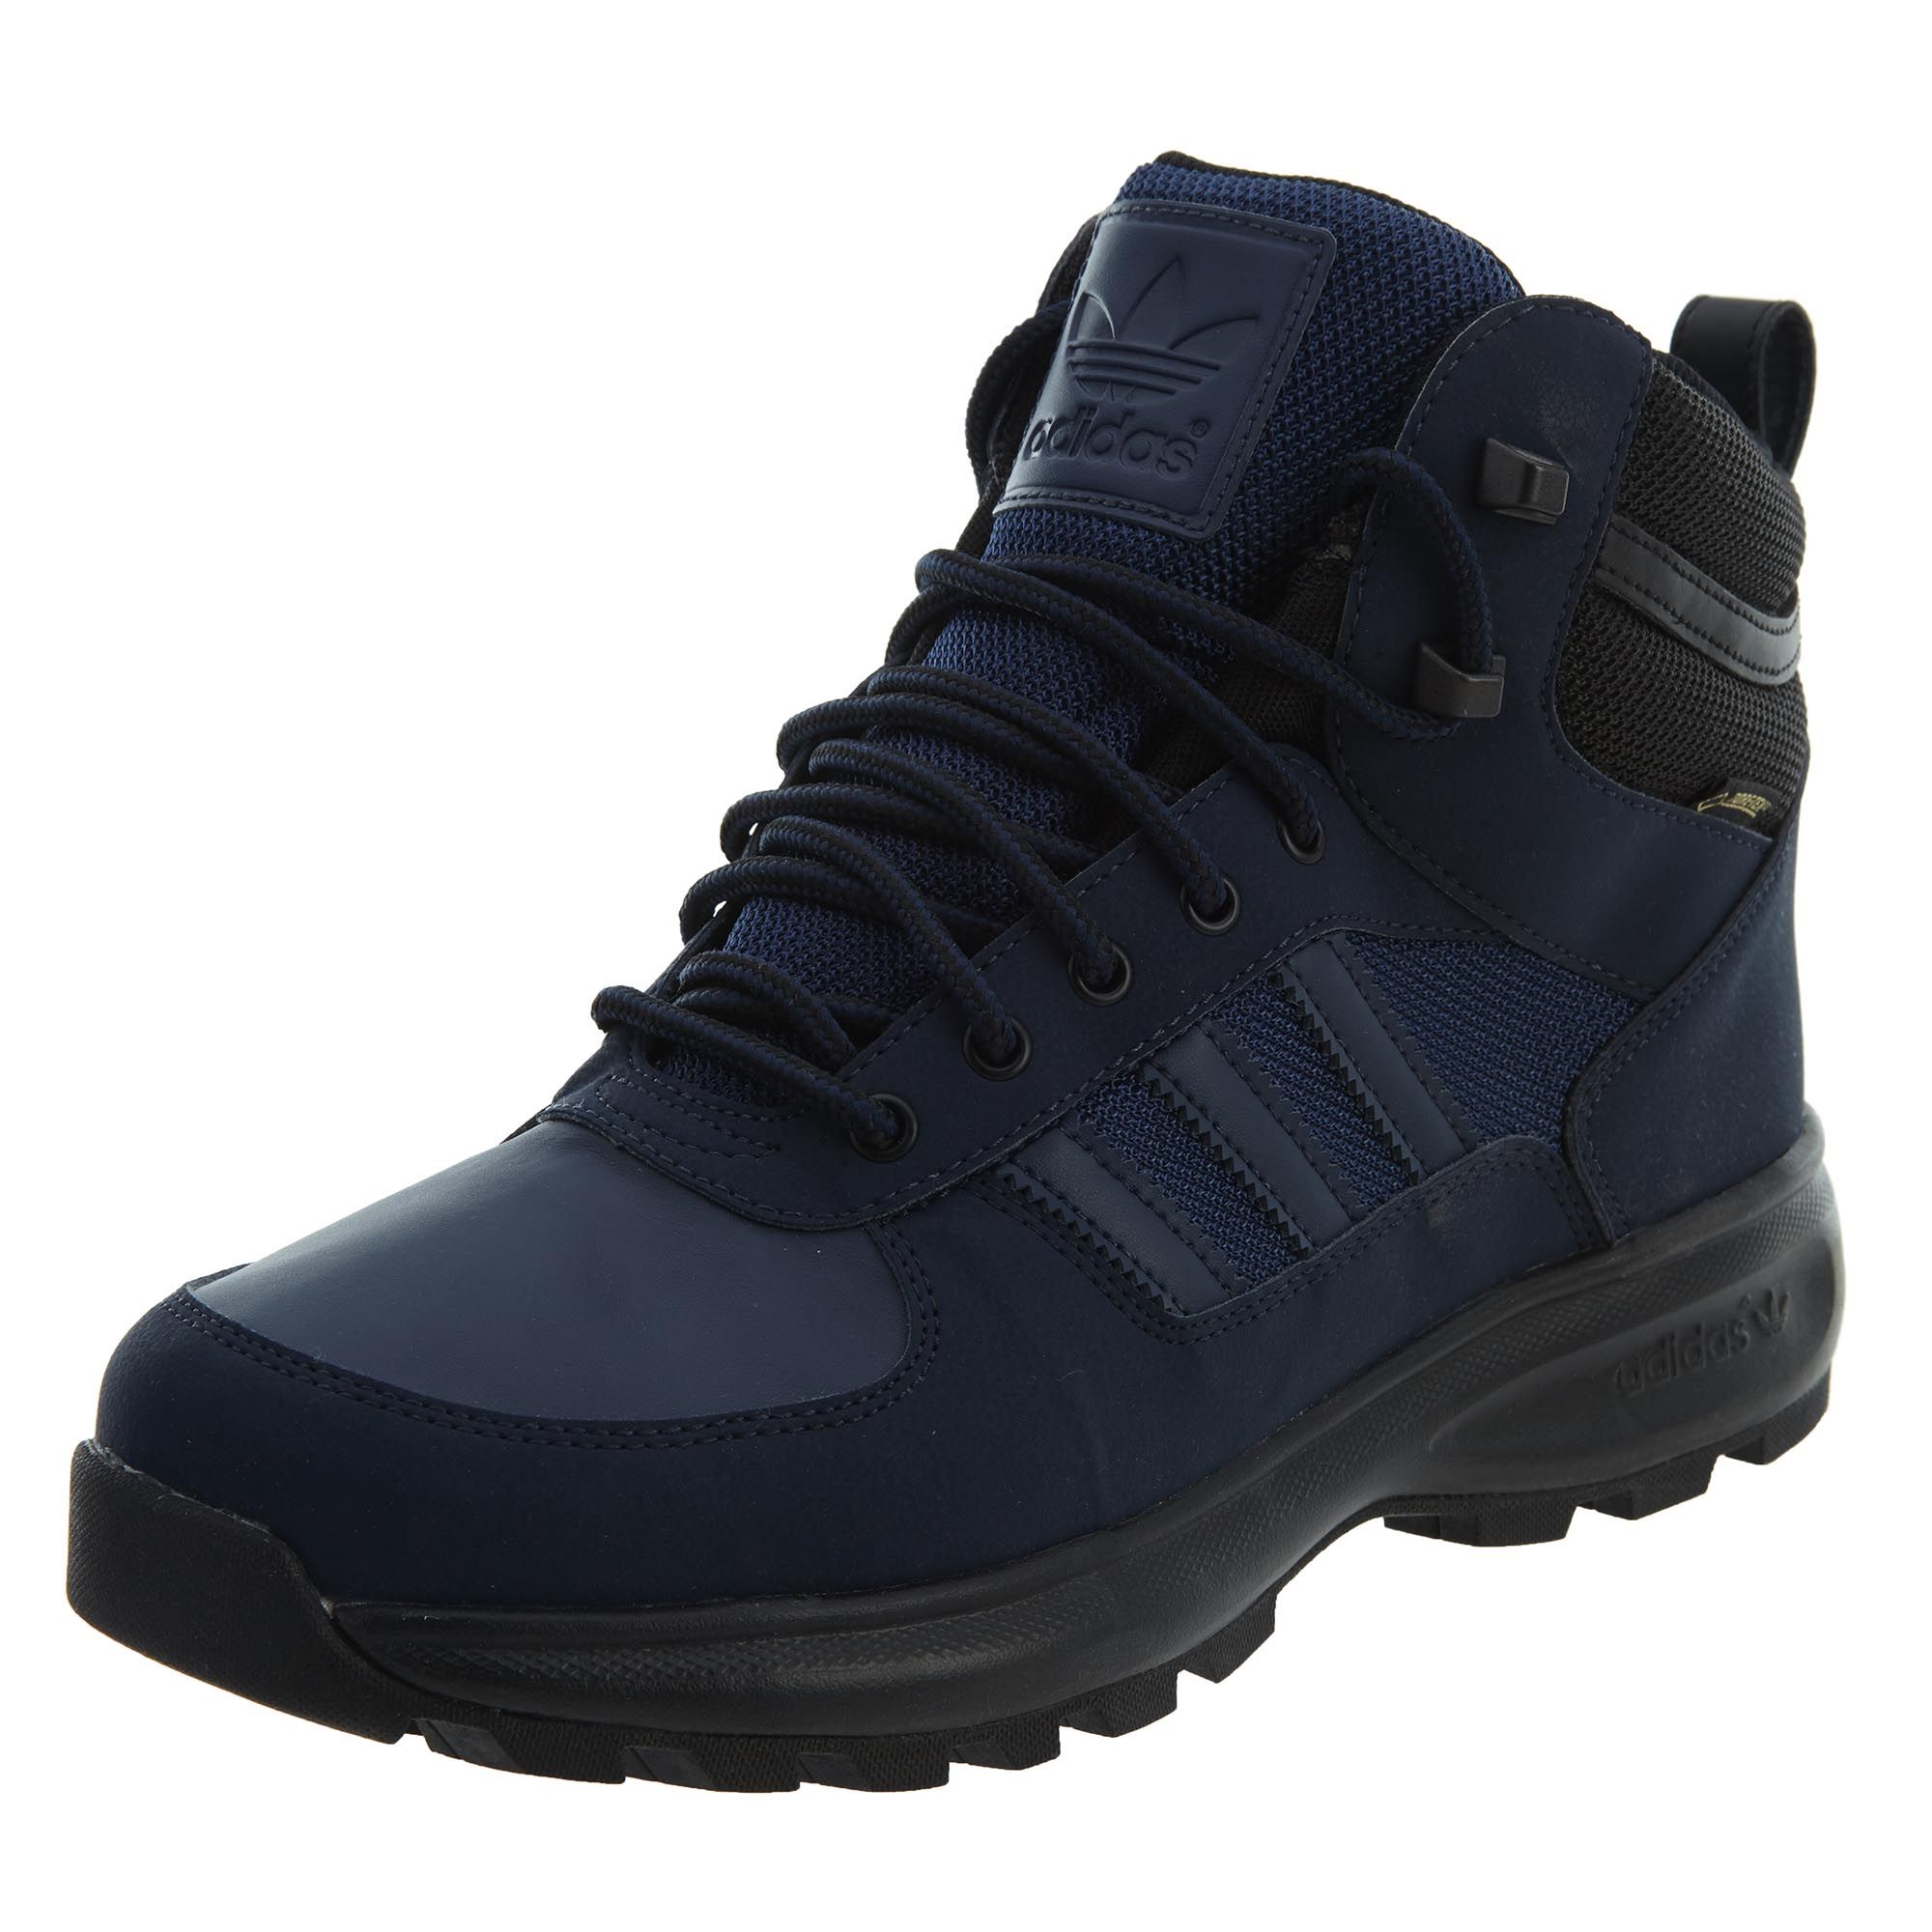 Adidas Chasker Boot Gtx Mens Style 